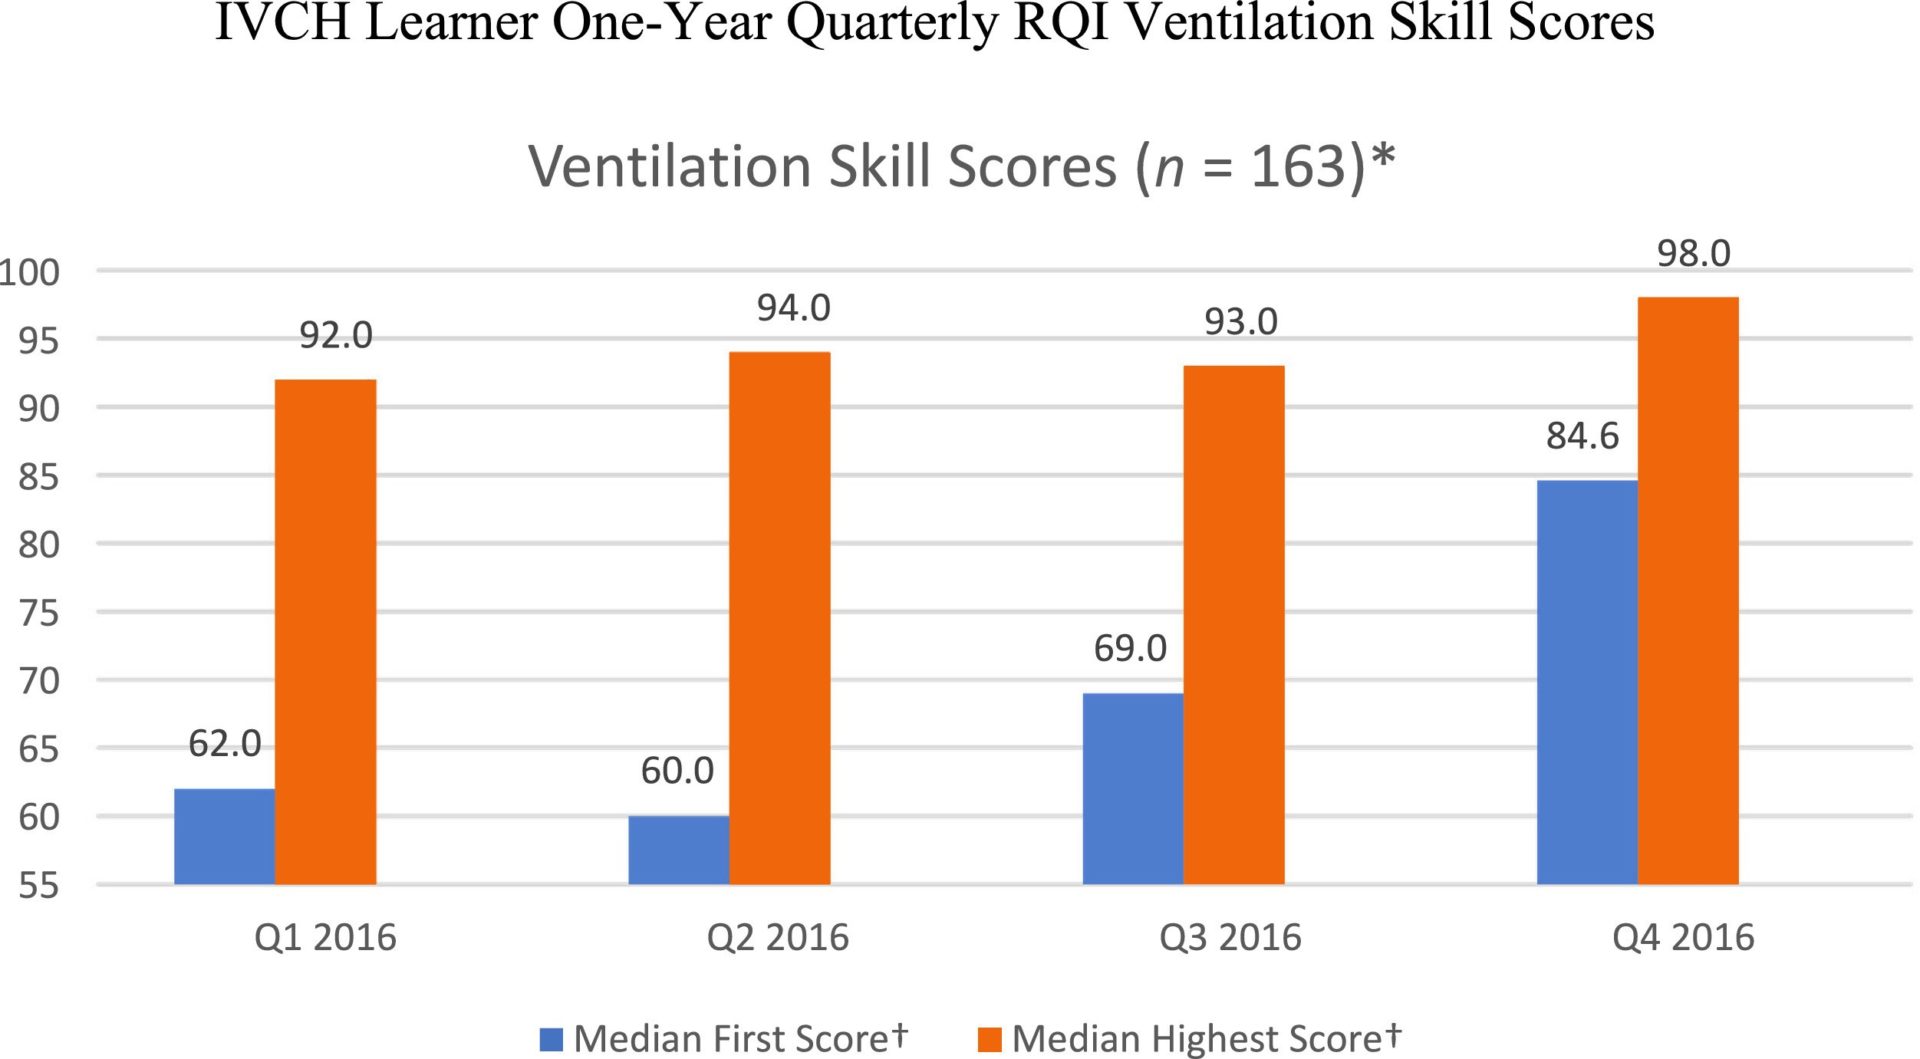 IVCH Learner One-Year Quarterly RQI Ventilation Skill Scores Chart. Detailed description below chart.